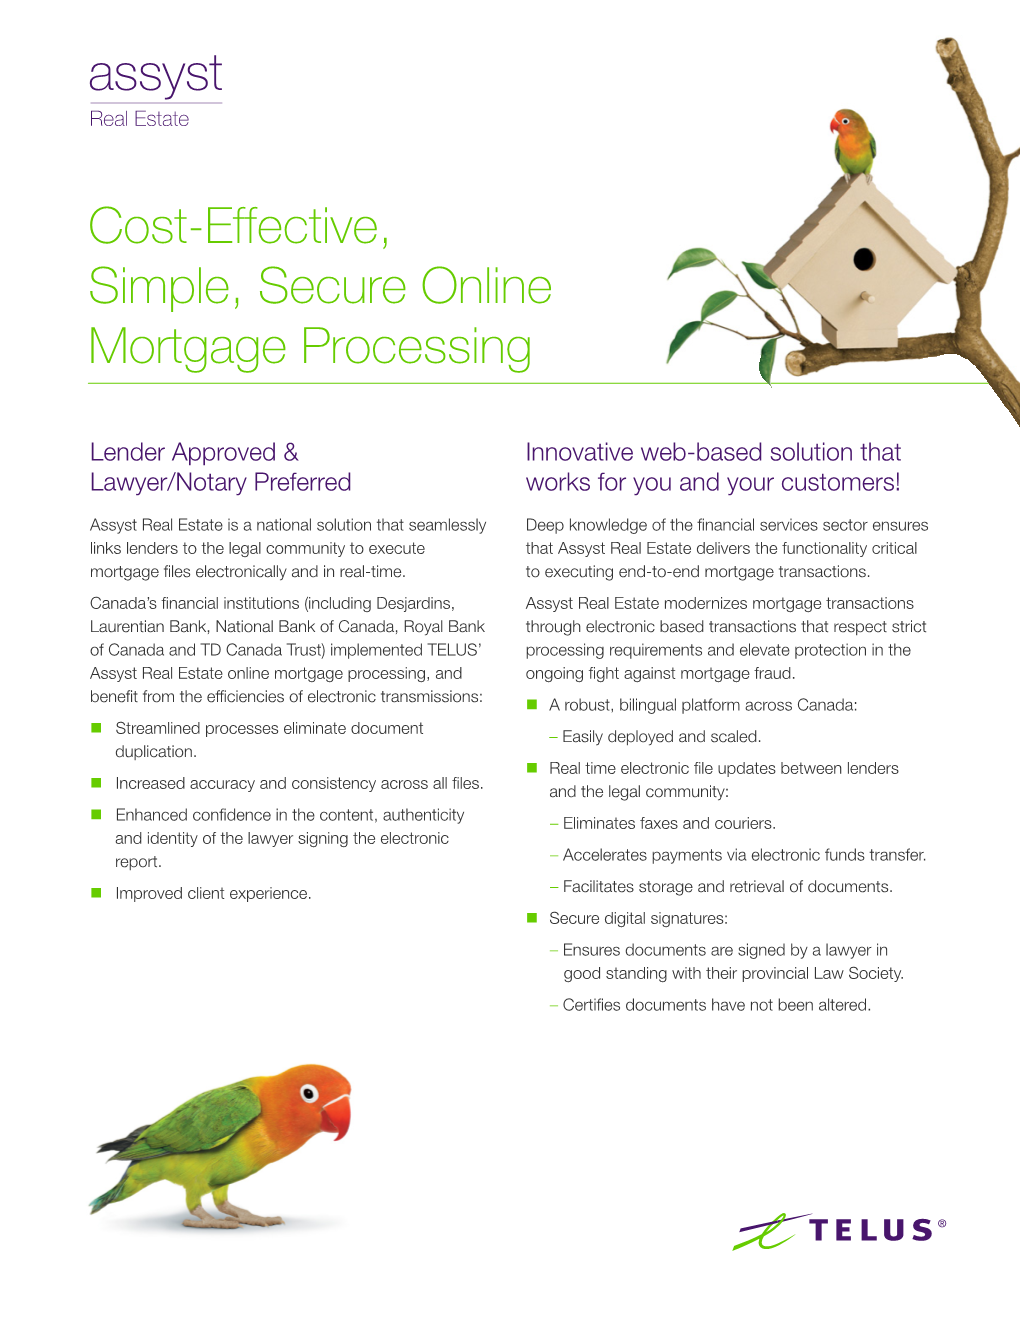 Cost-Effective, Simple, Secure Online Mortgage Processing